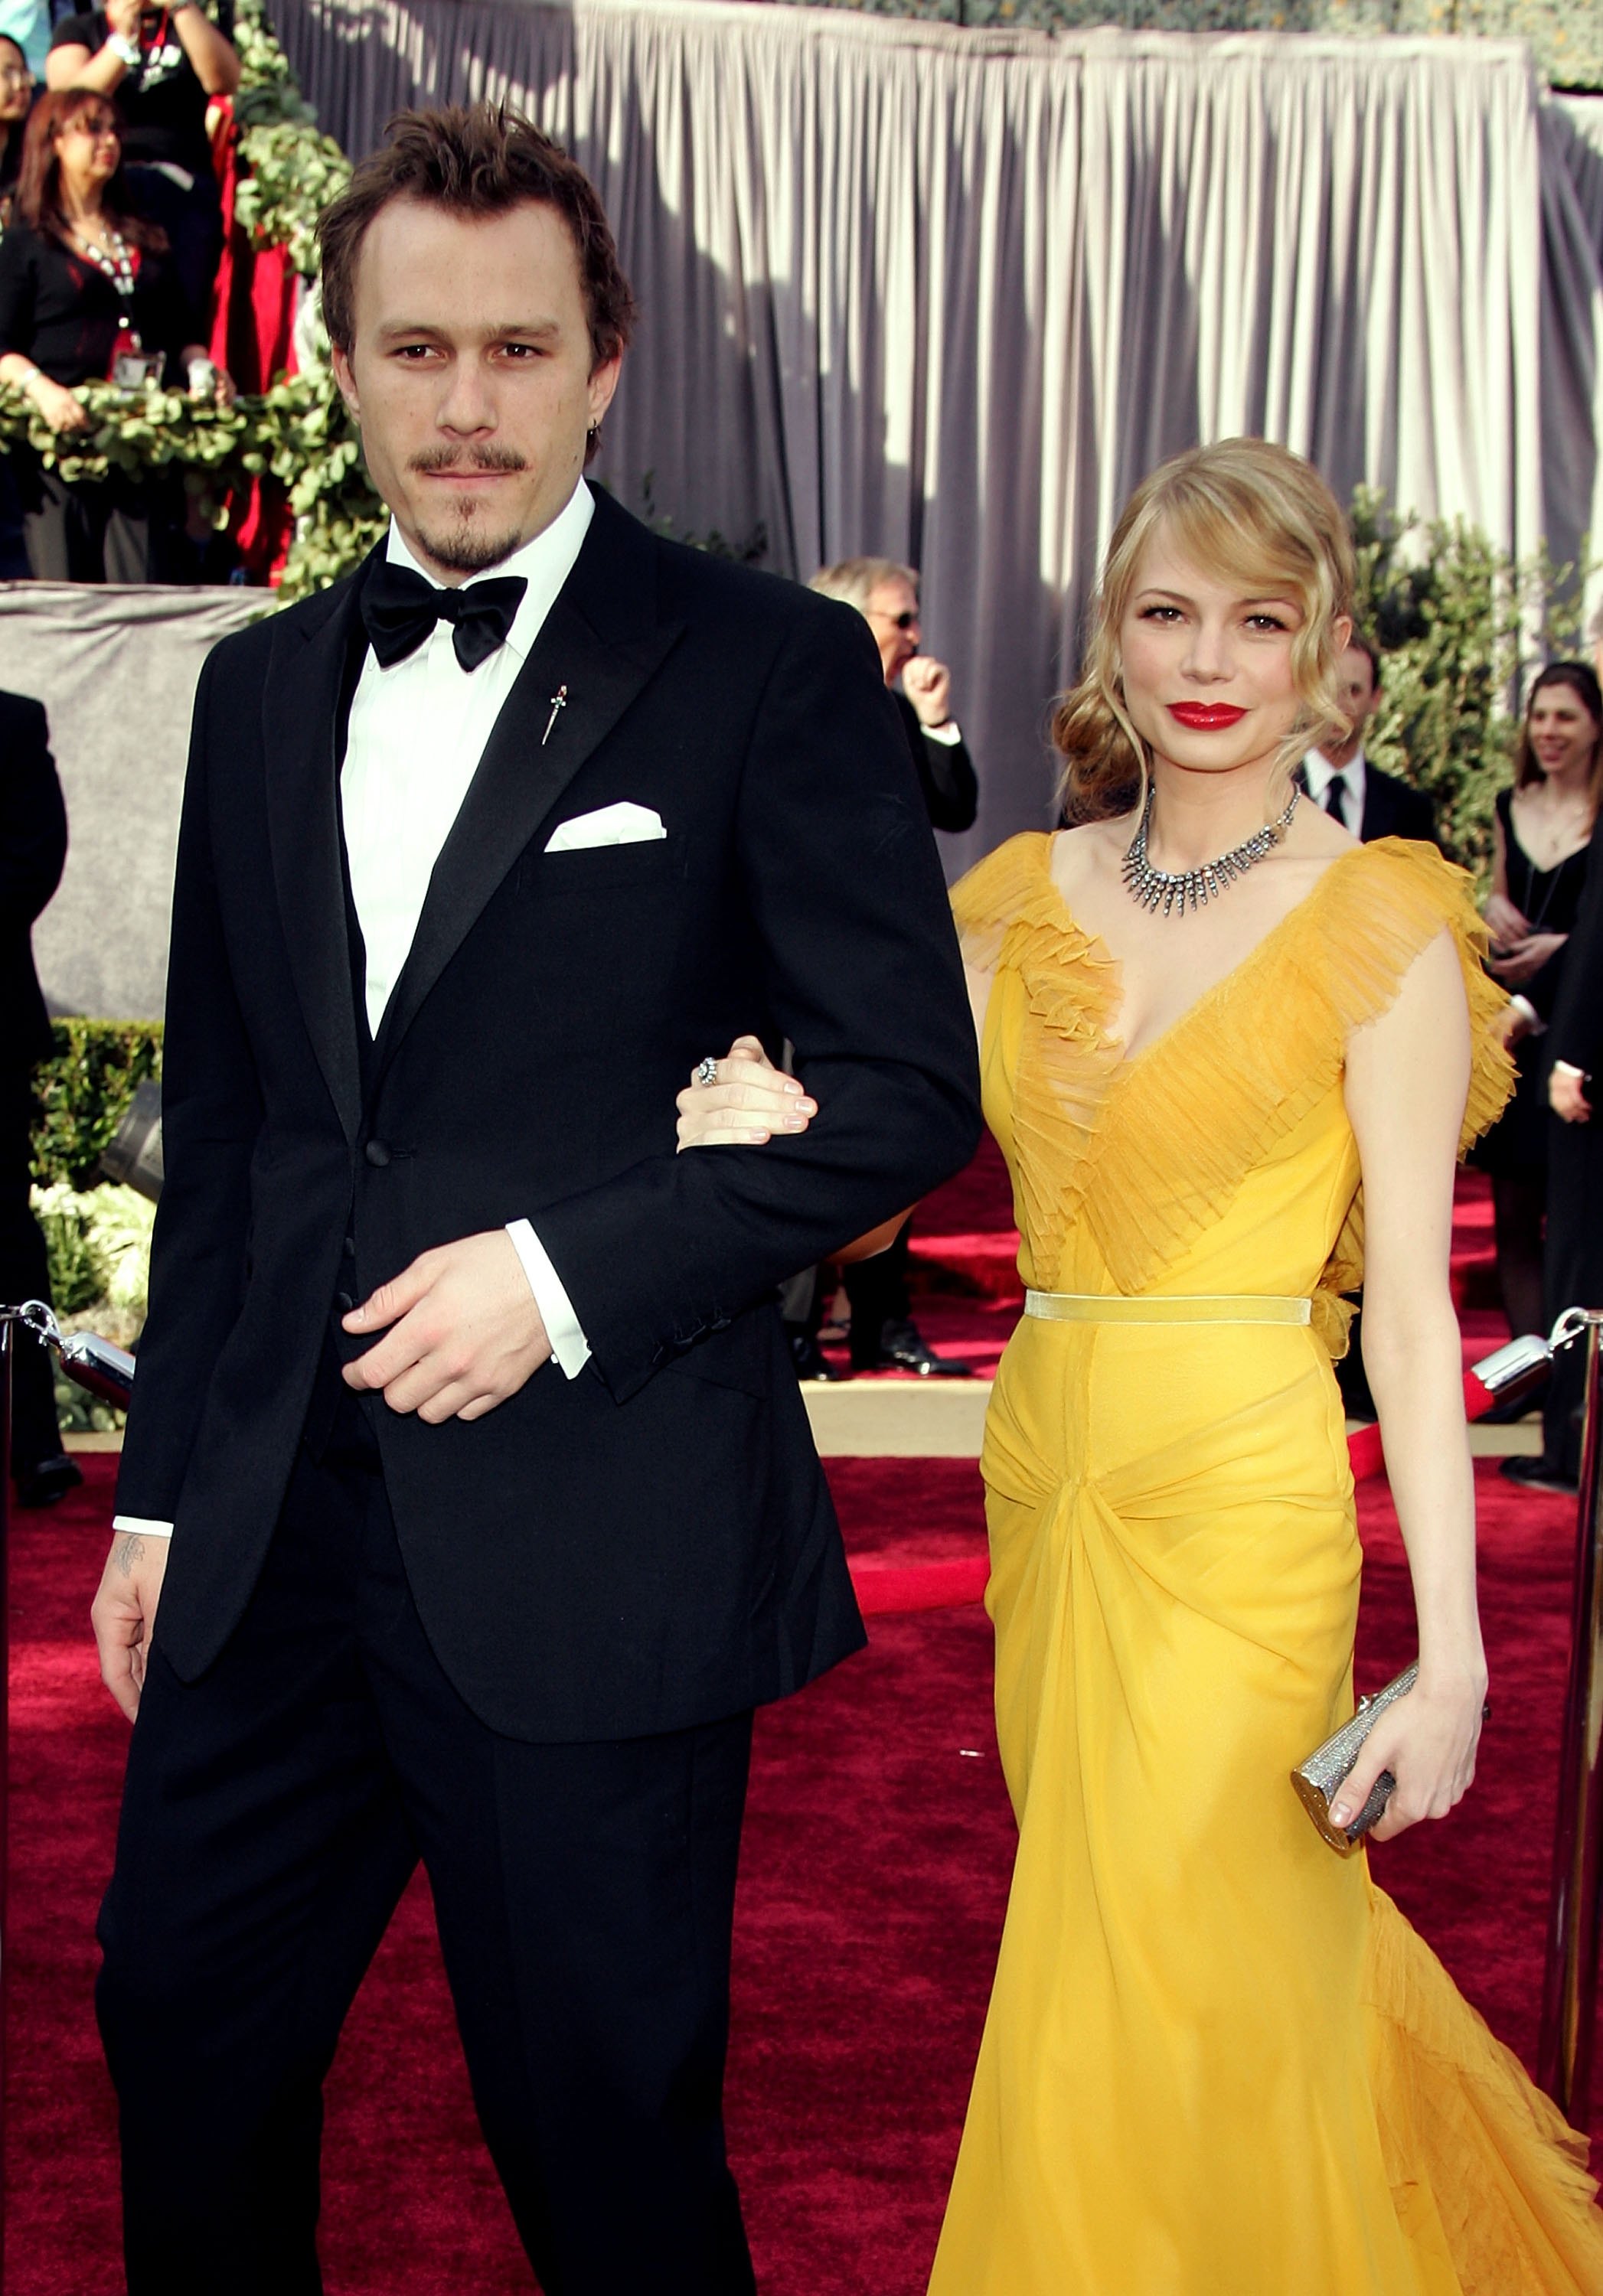 Heath Ledger and Michelle Williams at the 78th Annual Academy Awards in Hollywood, California on March 5, 2006 | Source: Getty Images